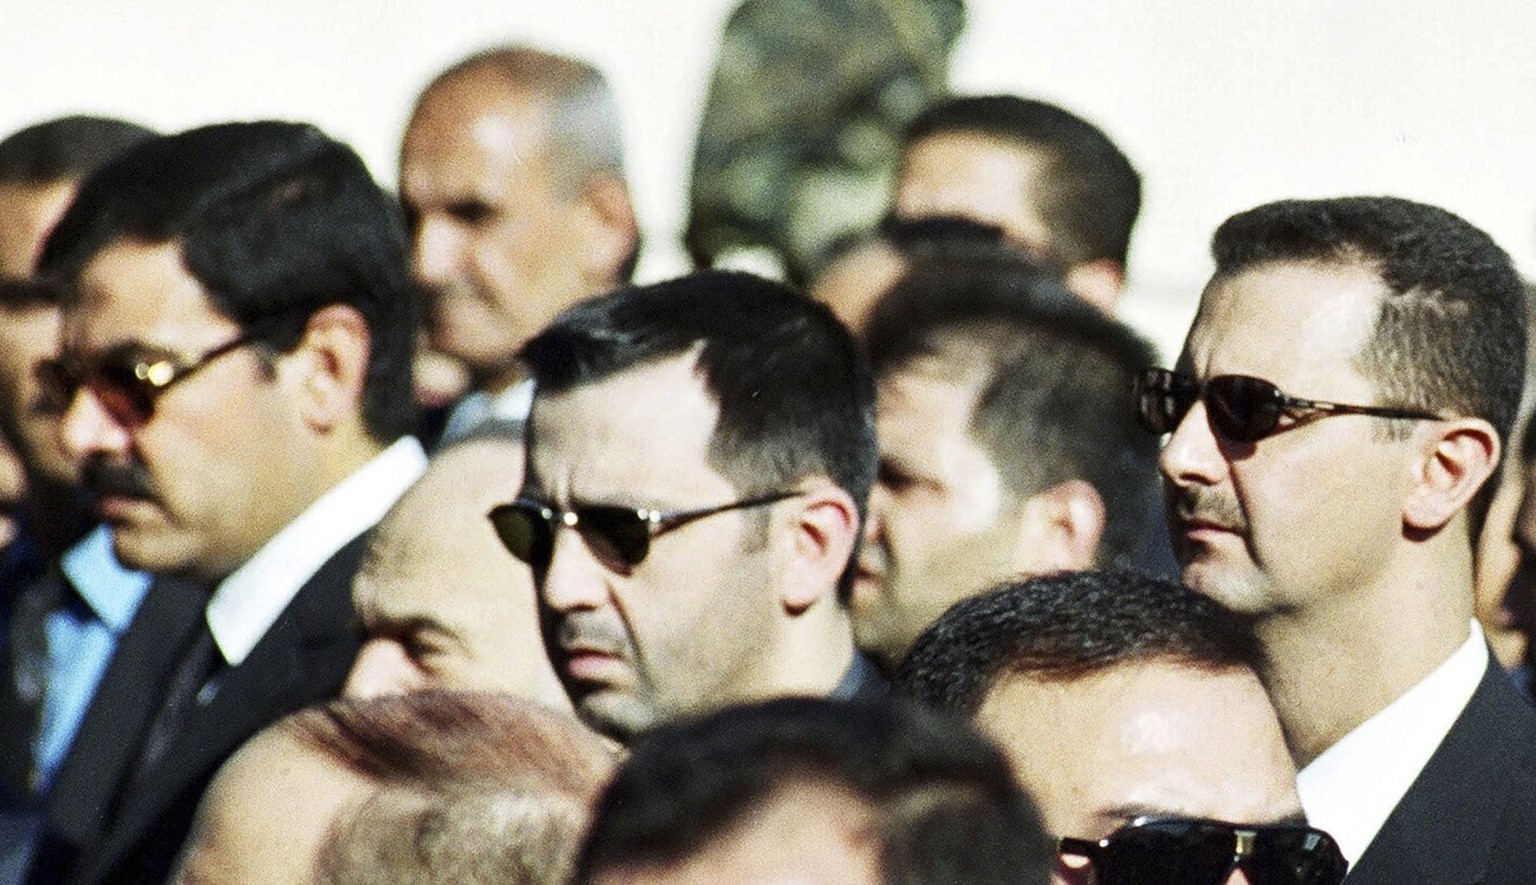 FILE - In this picture taken on June 13, 2000, Syrian President Bashar al-Assad, right, his brother Maher, centre, and brother-in-law Major General Assef Shawkat, left, stand during the funeral of lat ...